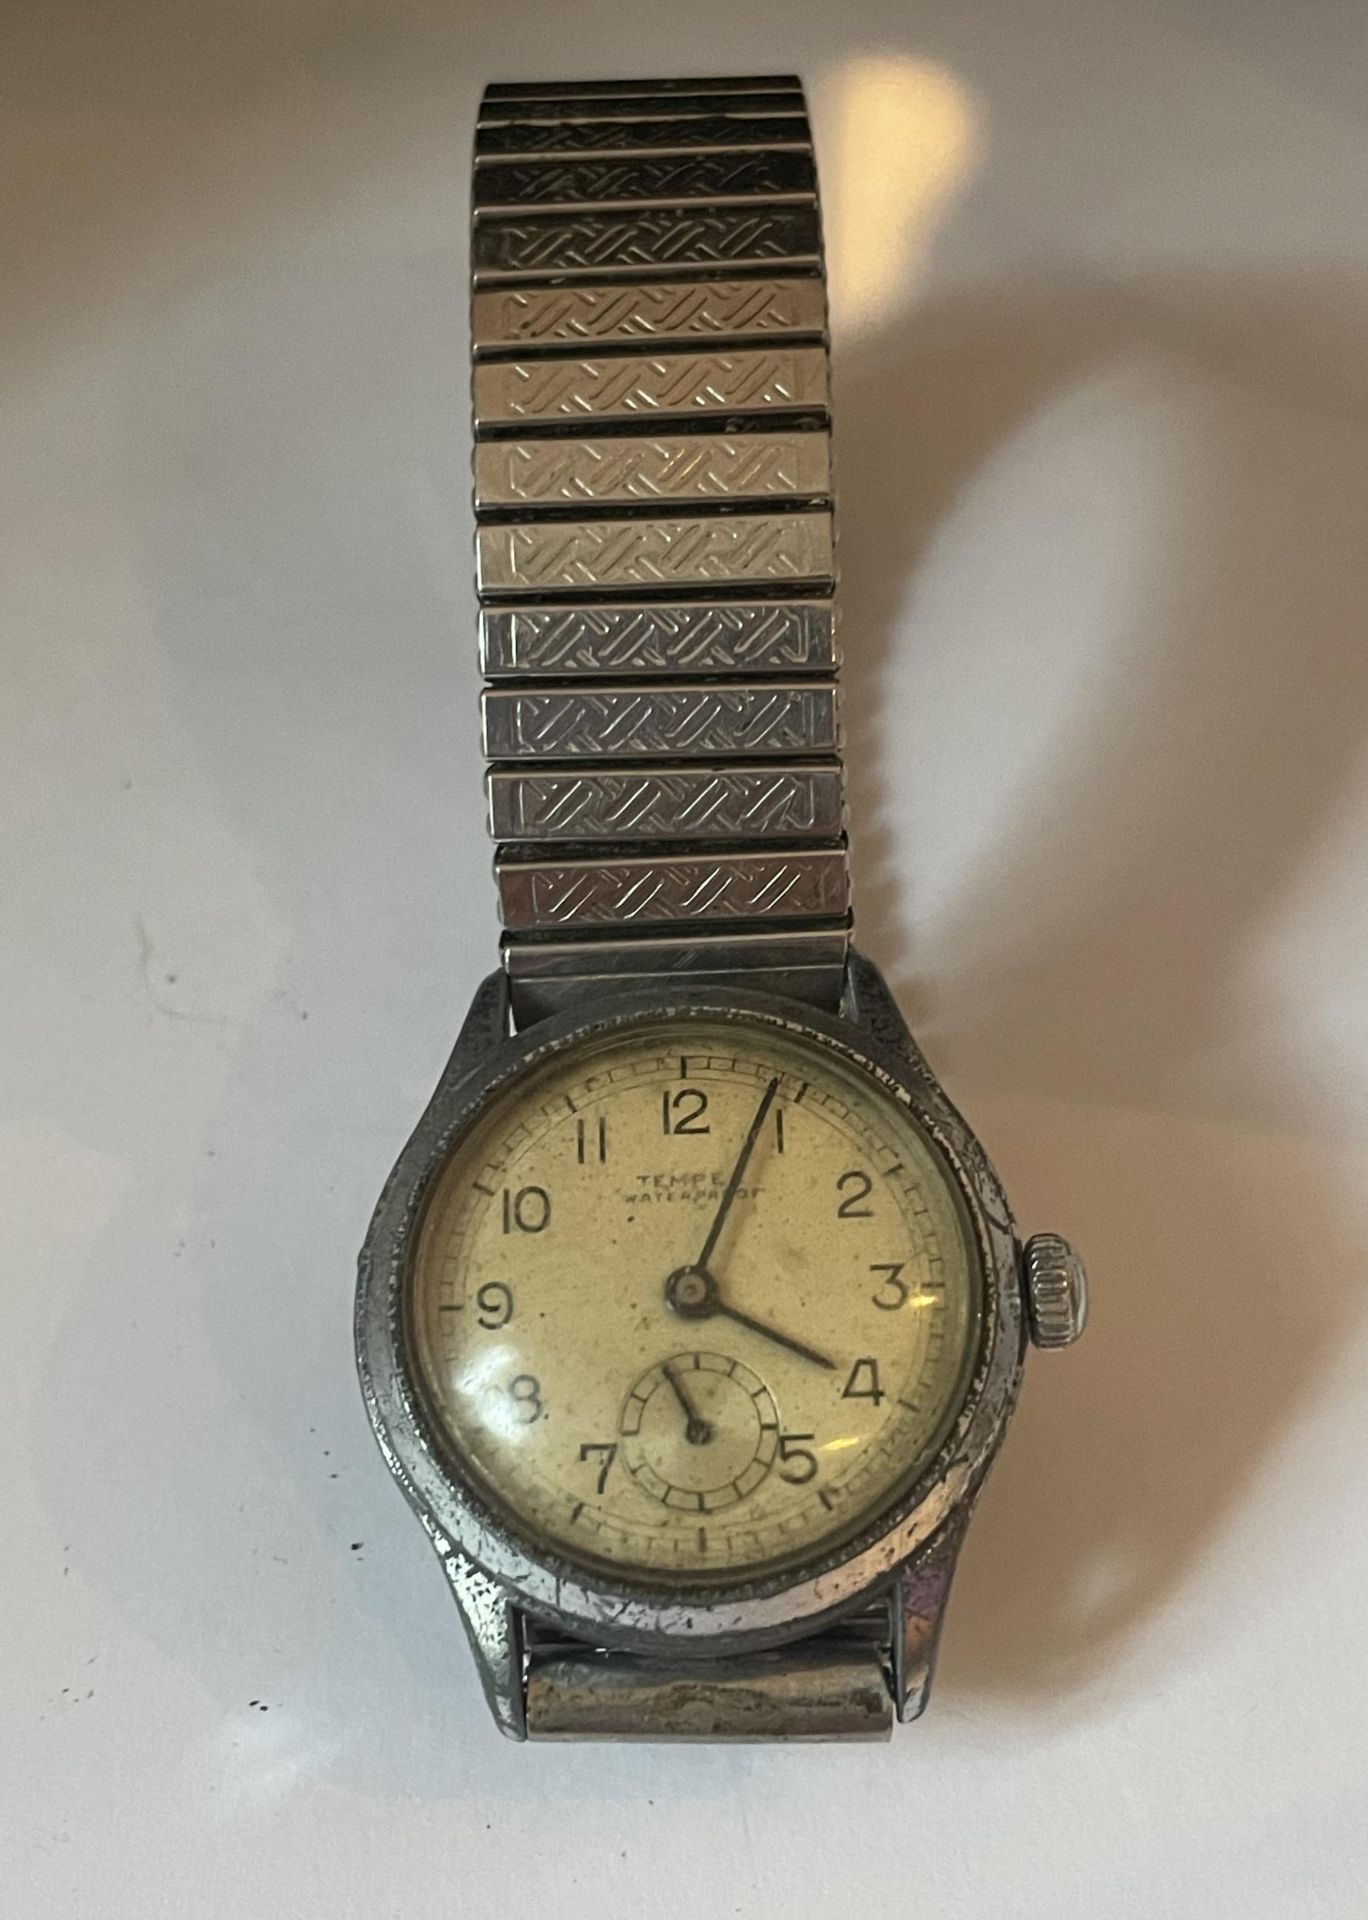 A TEMPEX 'WATERPROOF' MILITARY STYLE GENTS WRIST WATCH, SEEN WORKING BUT NO WARRANTIES GIVEN